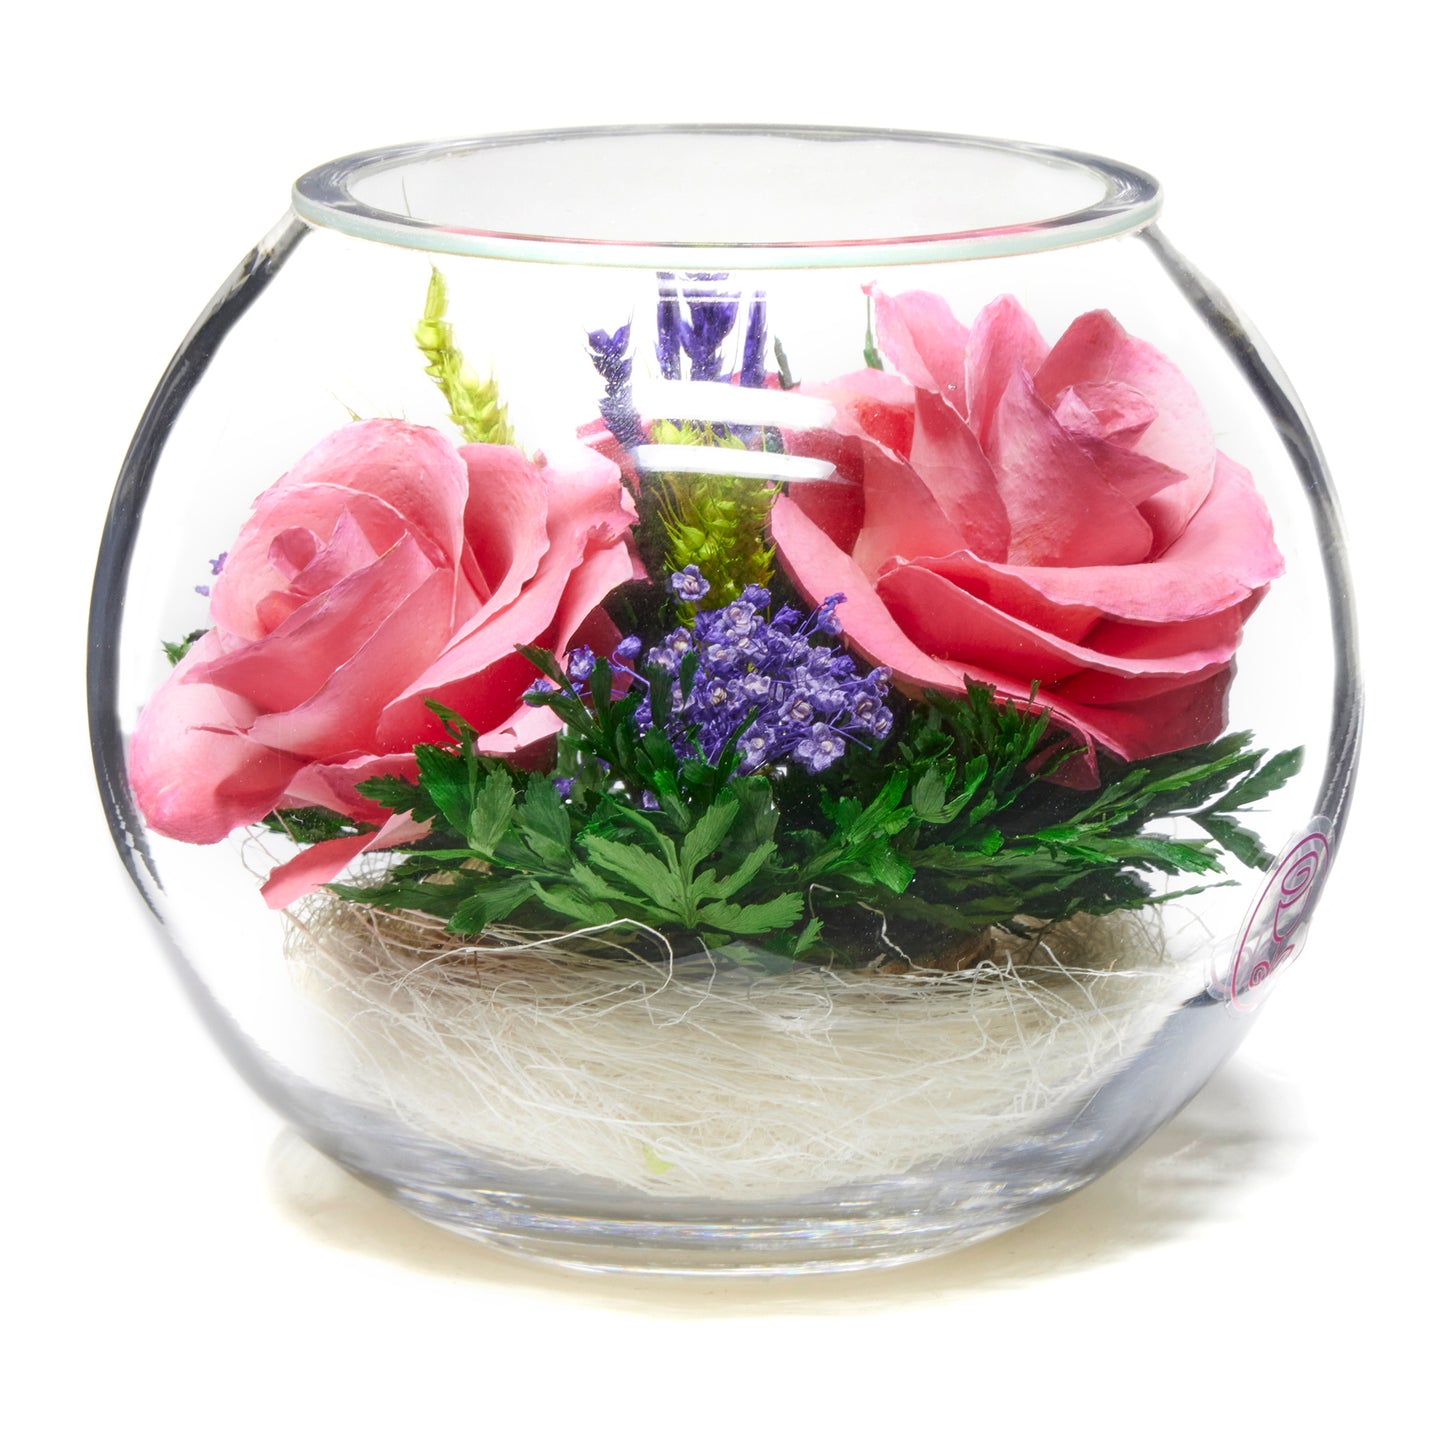 In Flores Veritas: Trio of Eternal Roses in Bowl-like Vase - Lasts up to 5 Years - Elegant Gift for Any Occasion